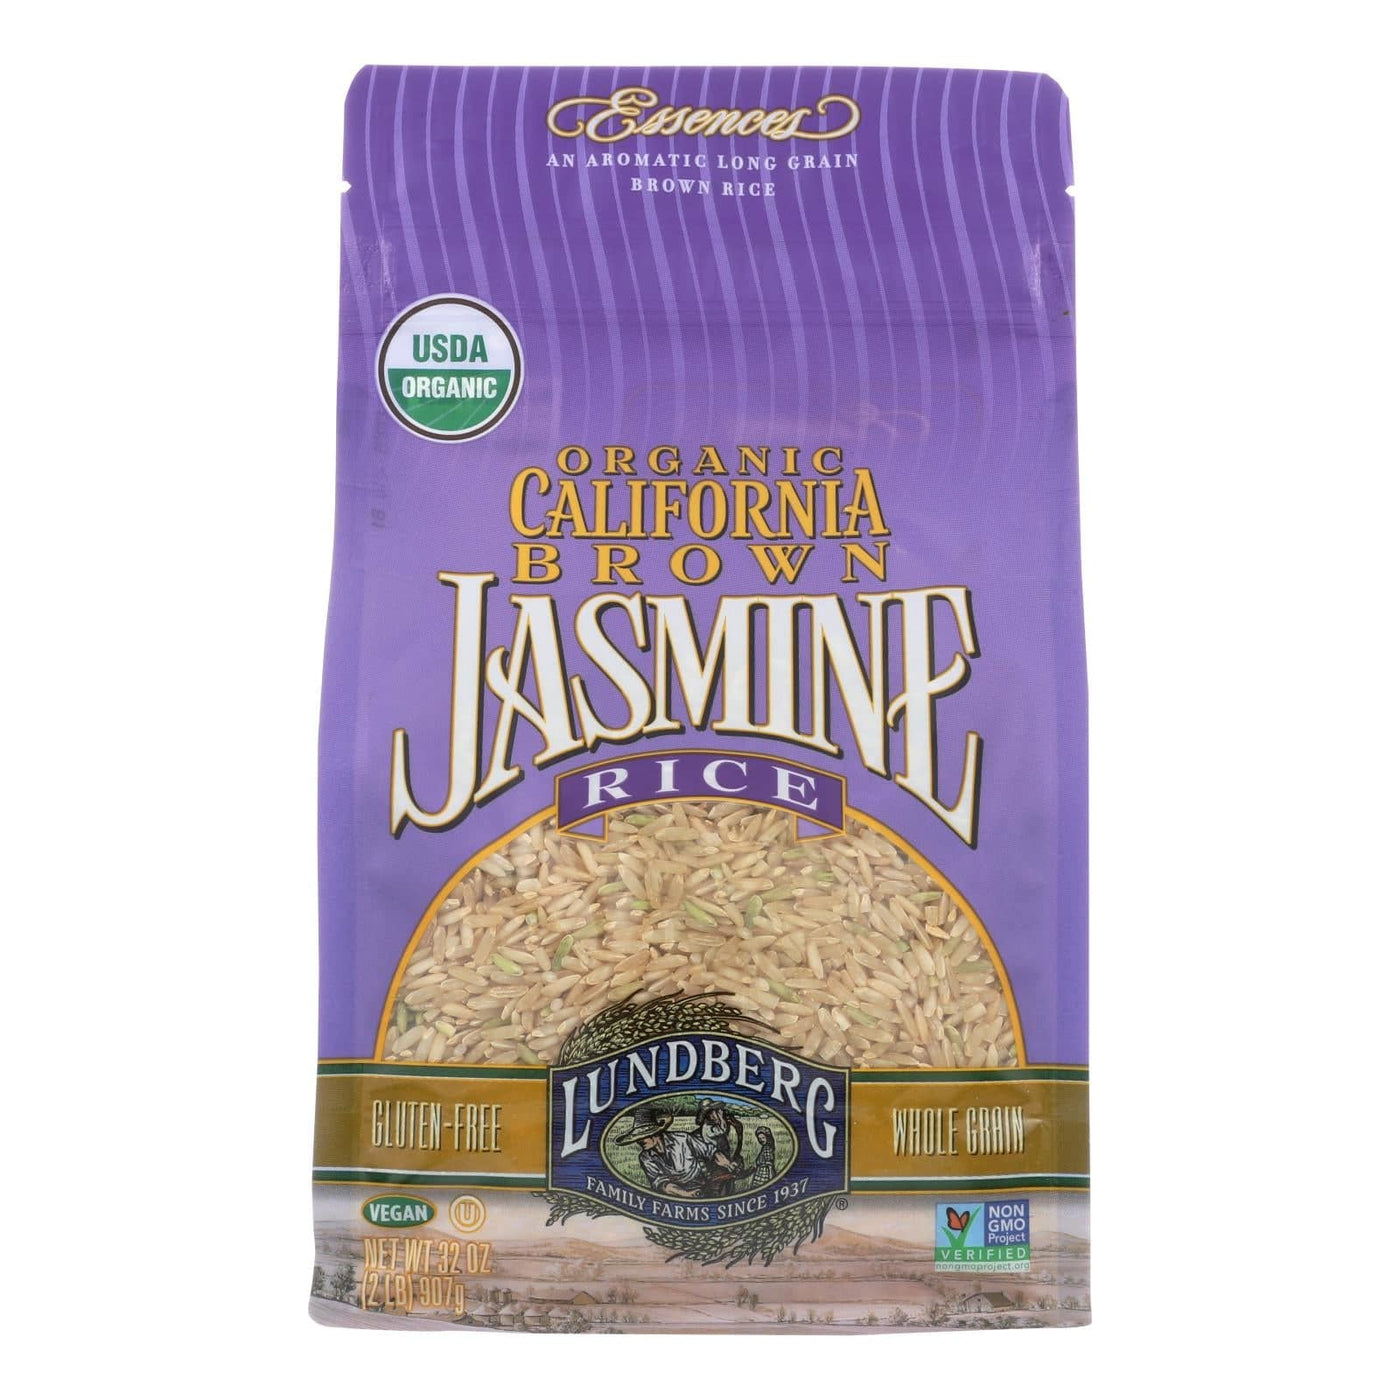 Buy Lundberg Family Farms Brown Jasmine Rice - Case Of 6 - 2 Lb.  at OnlyNaturals.us